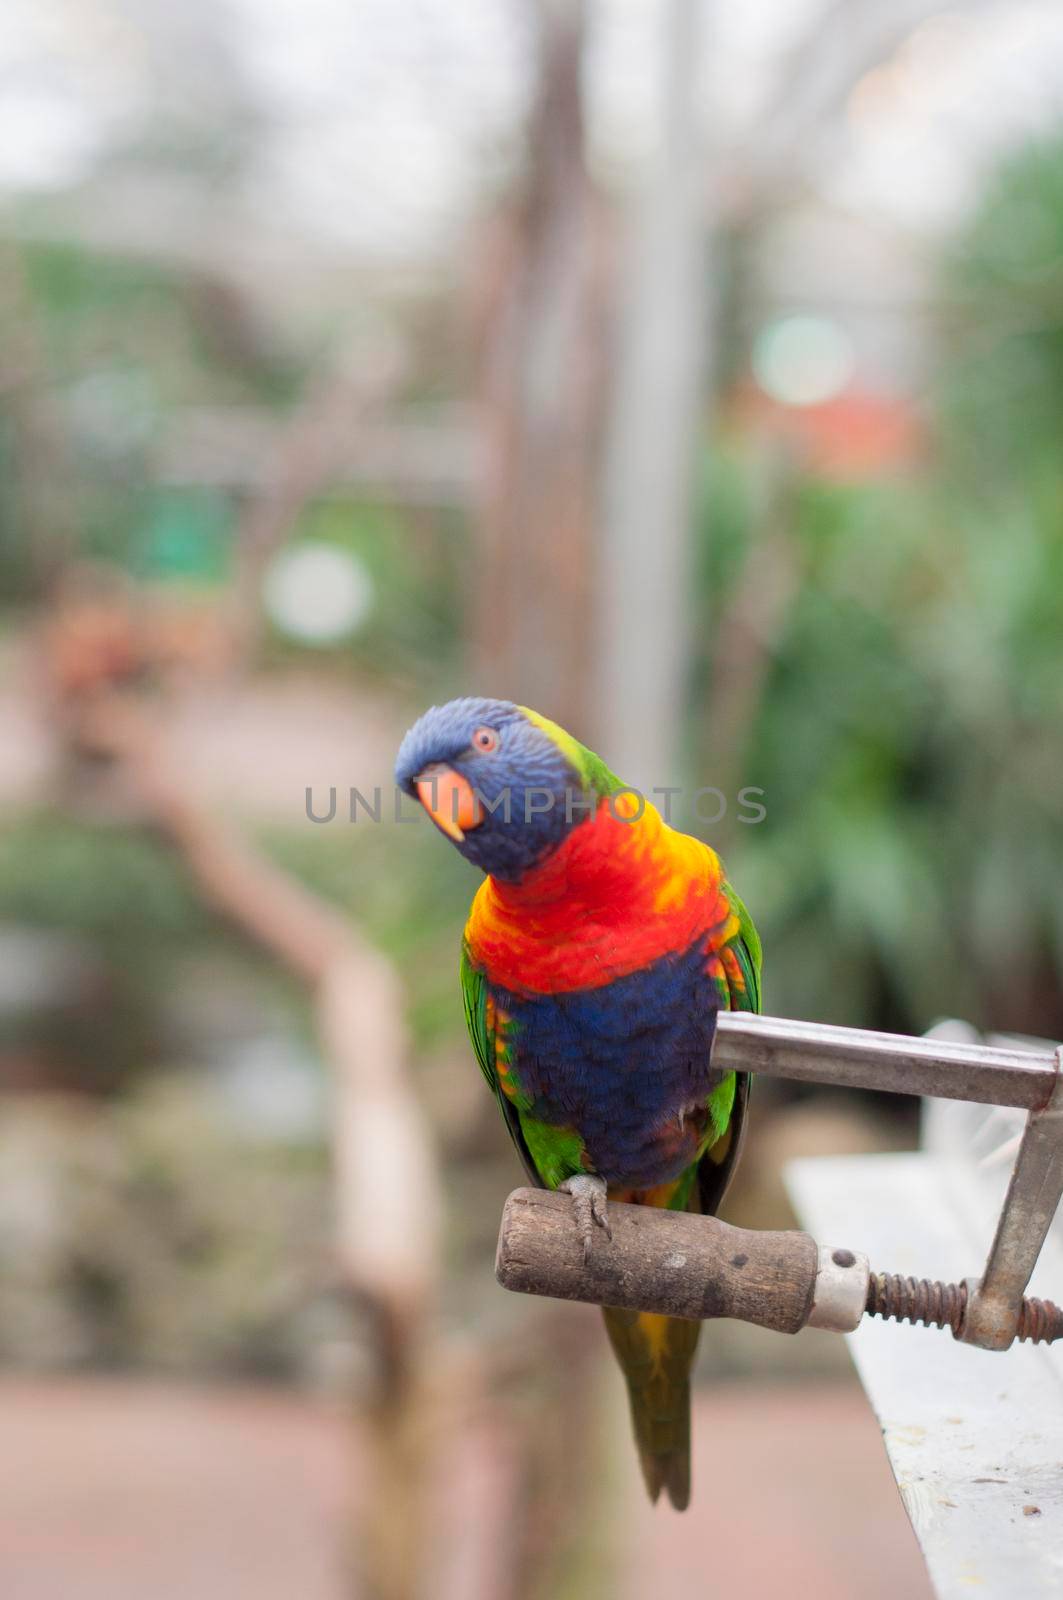 bright colorful rainbow lorikeet, cleans feathers and eats from the feeder, close-up. High quality photo